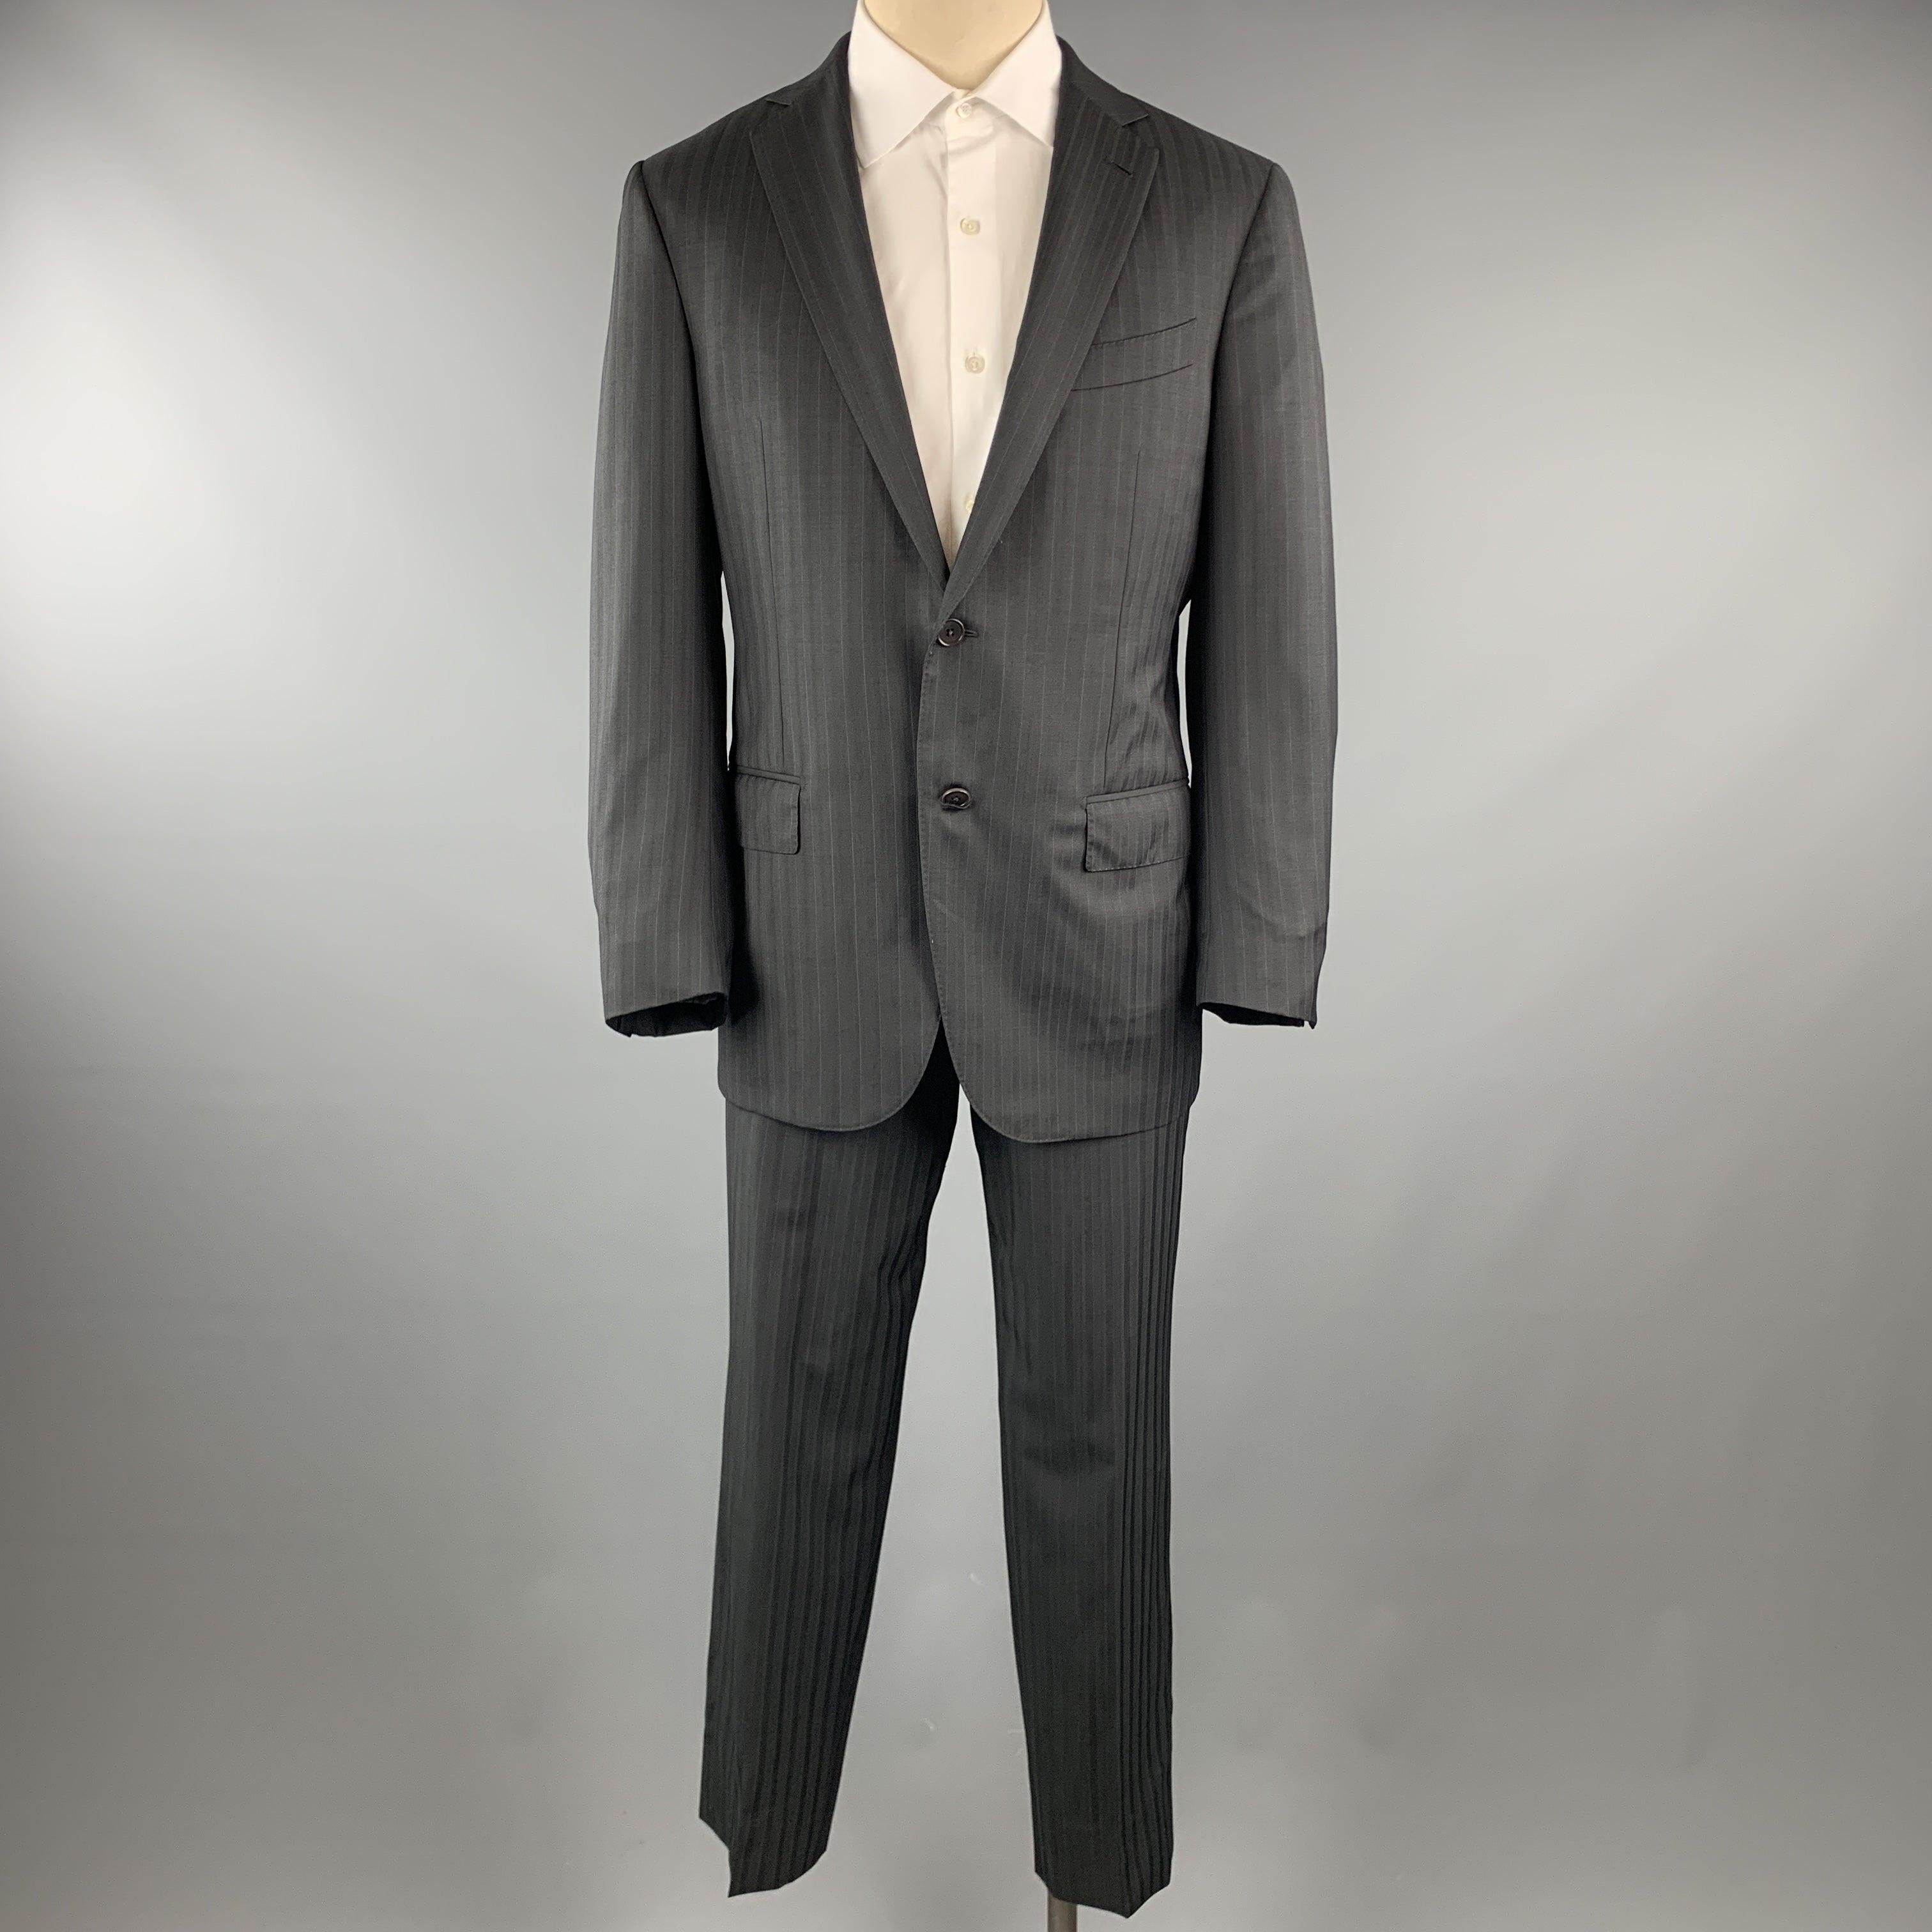 ERMENEGILDO ZEGNA
suit comes in a black stripe wool and includes a single breasted, two button sport coat with a notch lapel and matching front trousers. Made in Italy.Excellent Pre-Owned Condition. 

Marked:   50 

Measurements: 
  -JacketShoulder: